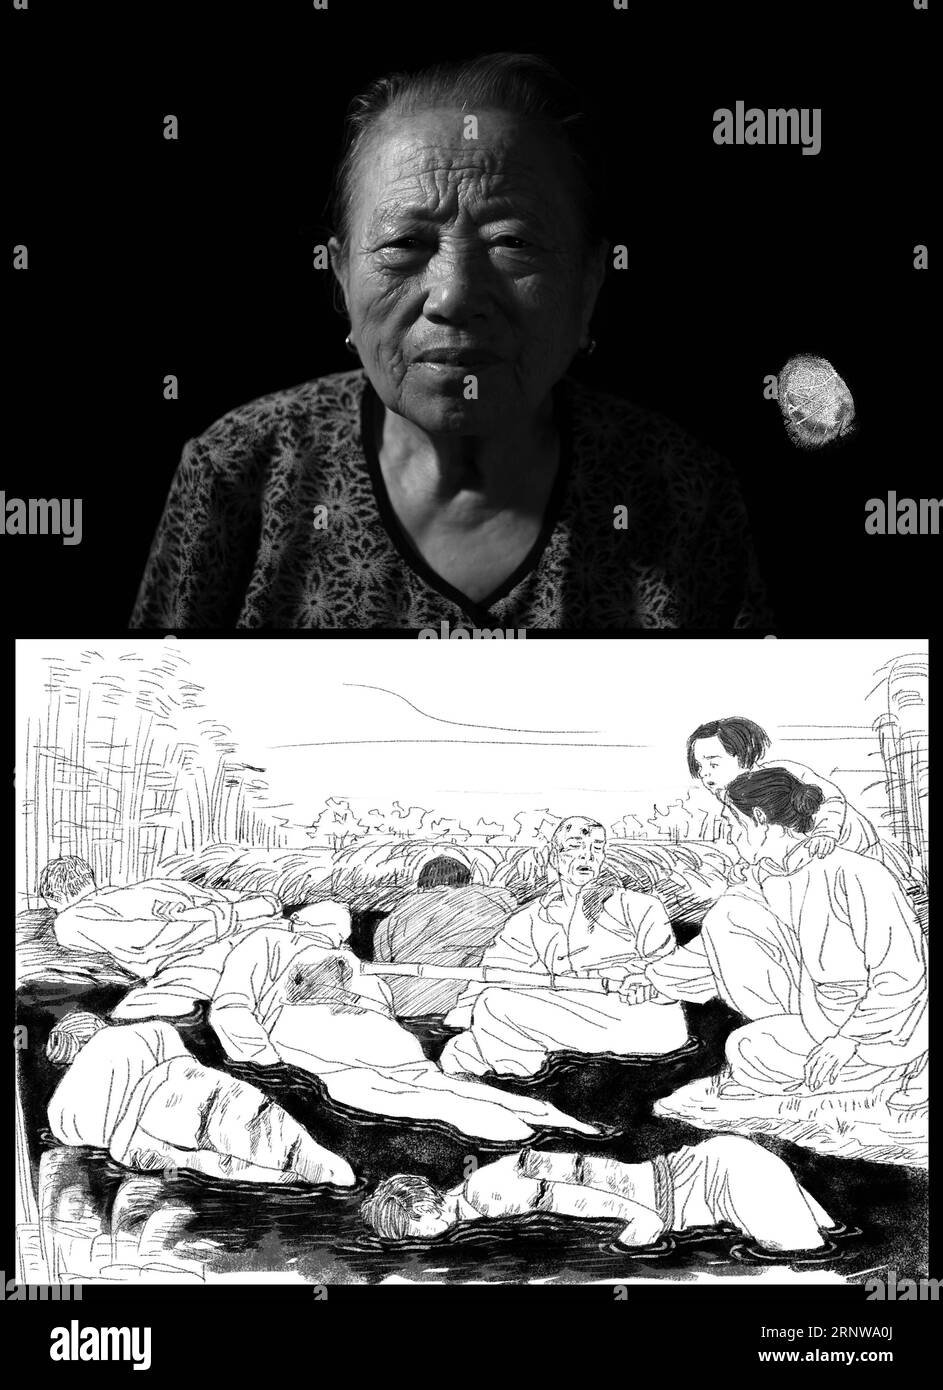 (171210) -- NANJING, Dec. 10, 2017 -- The combo picture shows the portrait, fingerprint of Shi Xiuying and illustrated story reviving her tragedy based on facts. Born on Oct. 26, 1926, Shi is a survivor of Nanjing Massacre, a heinous crime committed by the Japanese militarists during World War II in 1937, in Nanjing, then capital of China. In the winter of 1937, Shi found the body of his father in a pile of corpses slaughtered by Japanese invaders. Her eldest brother Shi Kunbao was forced onto a Japanese military truck and gone forever. The year 2017 marks the 80th anniversary of the Nanjing M Stock Photo